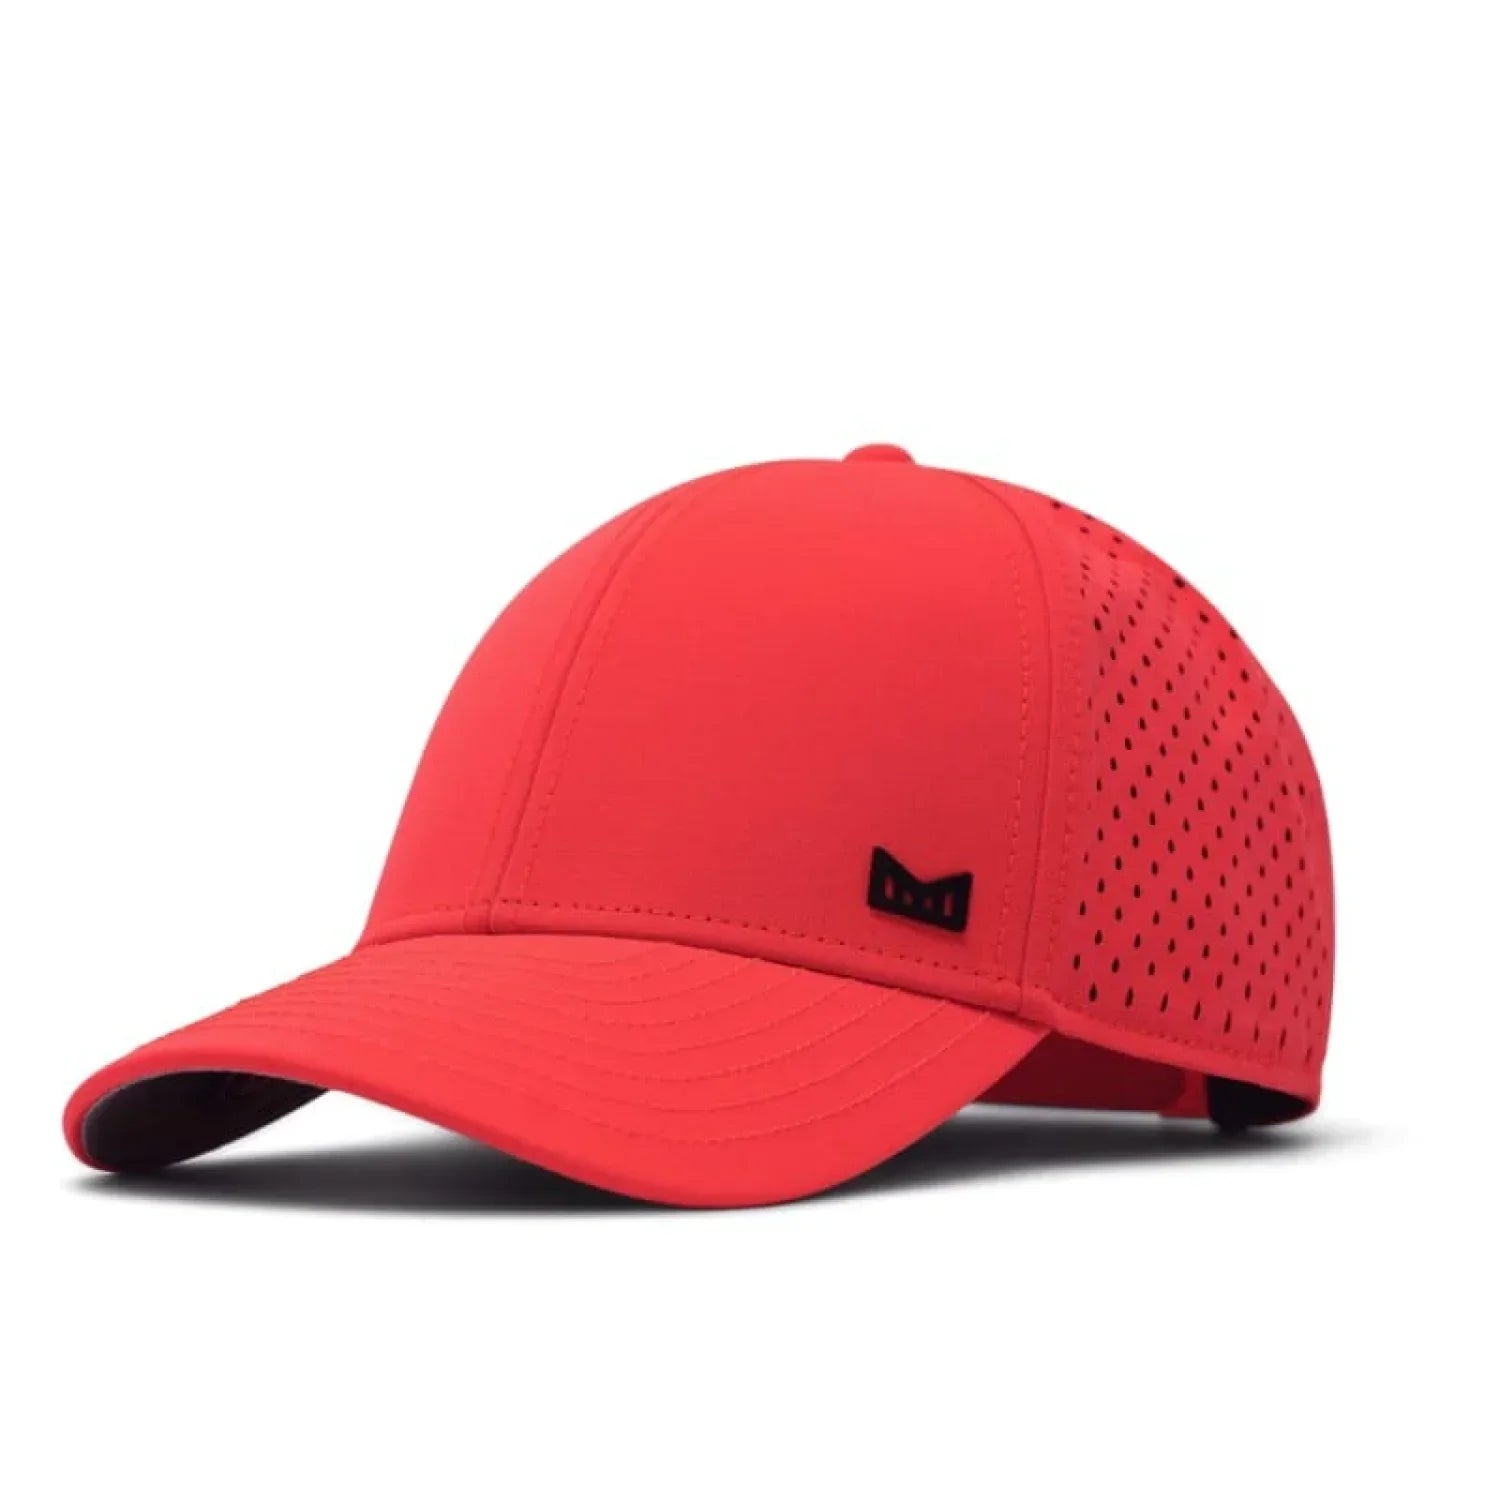 MELIN HATS - HATS BILLED - HATS BILLED Hydro A-Game Icon INFRARED CLASSIC